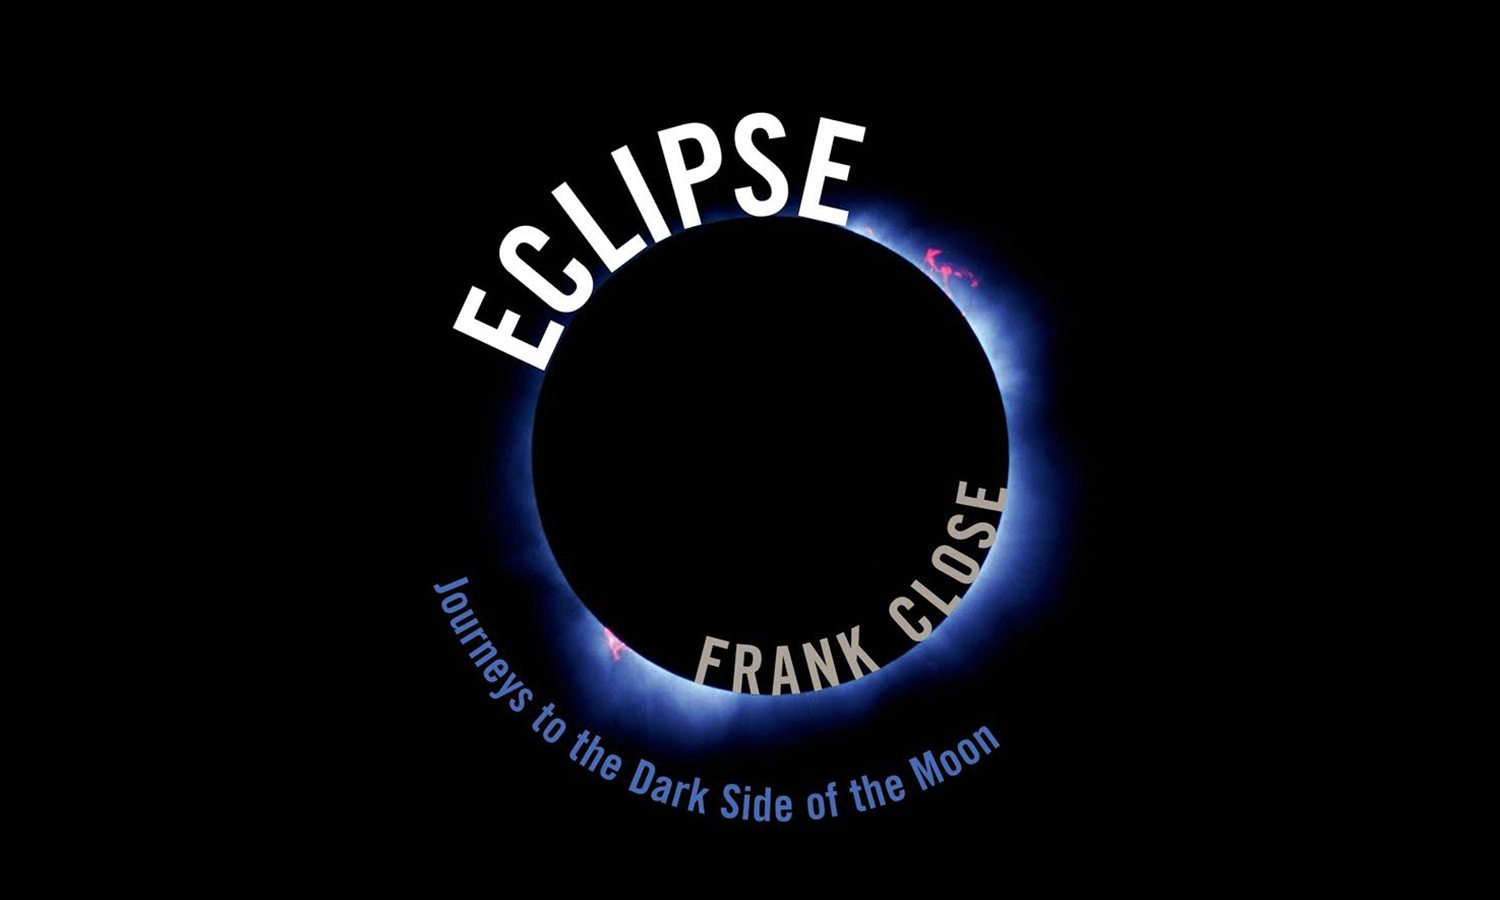 Best Books to Prepare for the 2017 Total Solar Eclipse